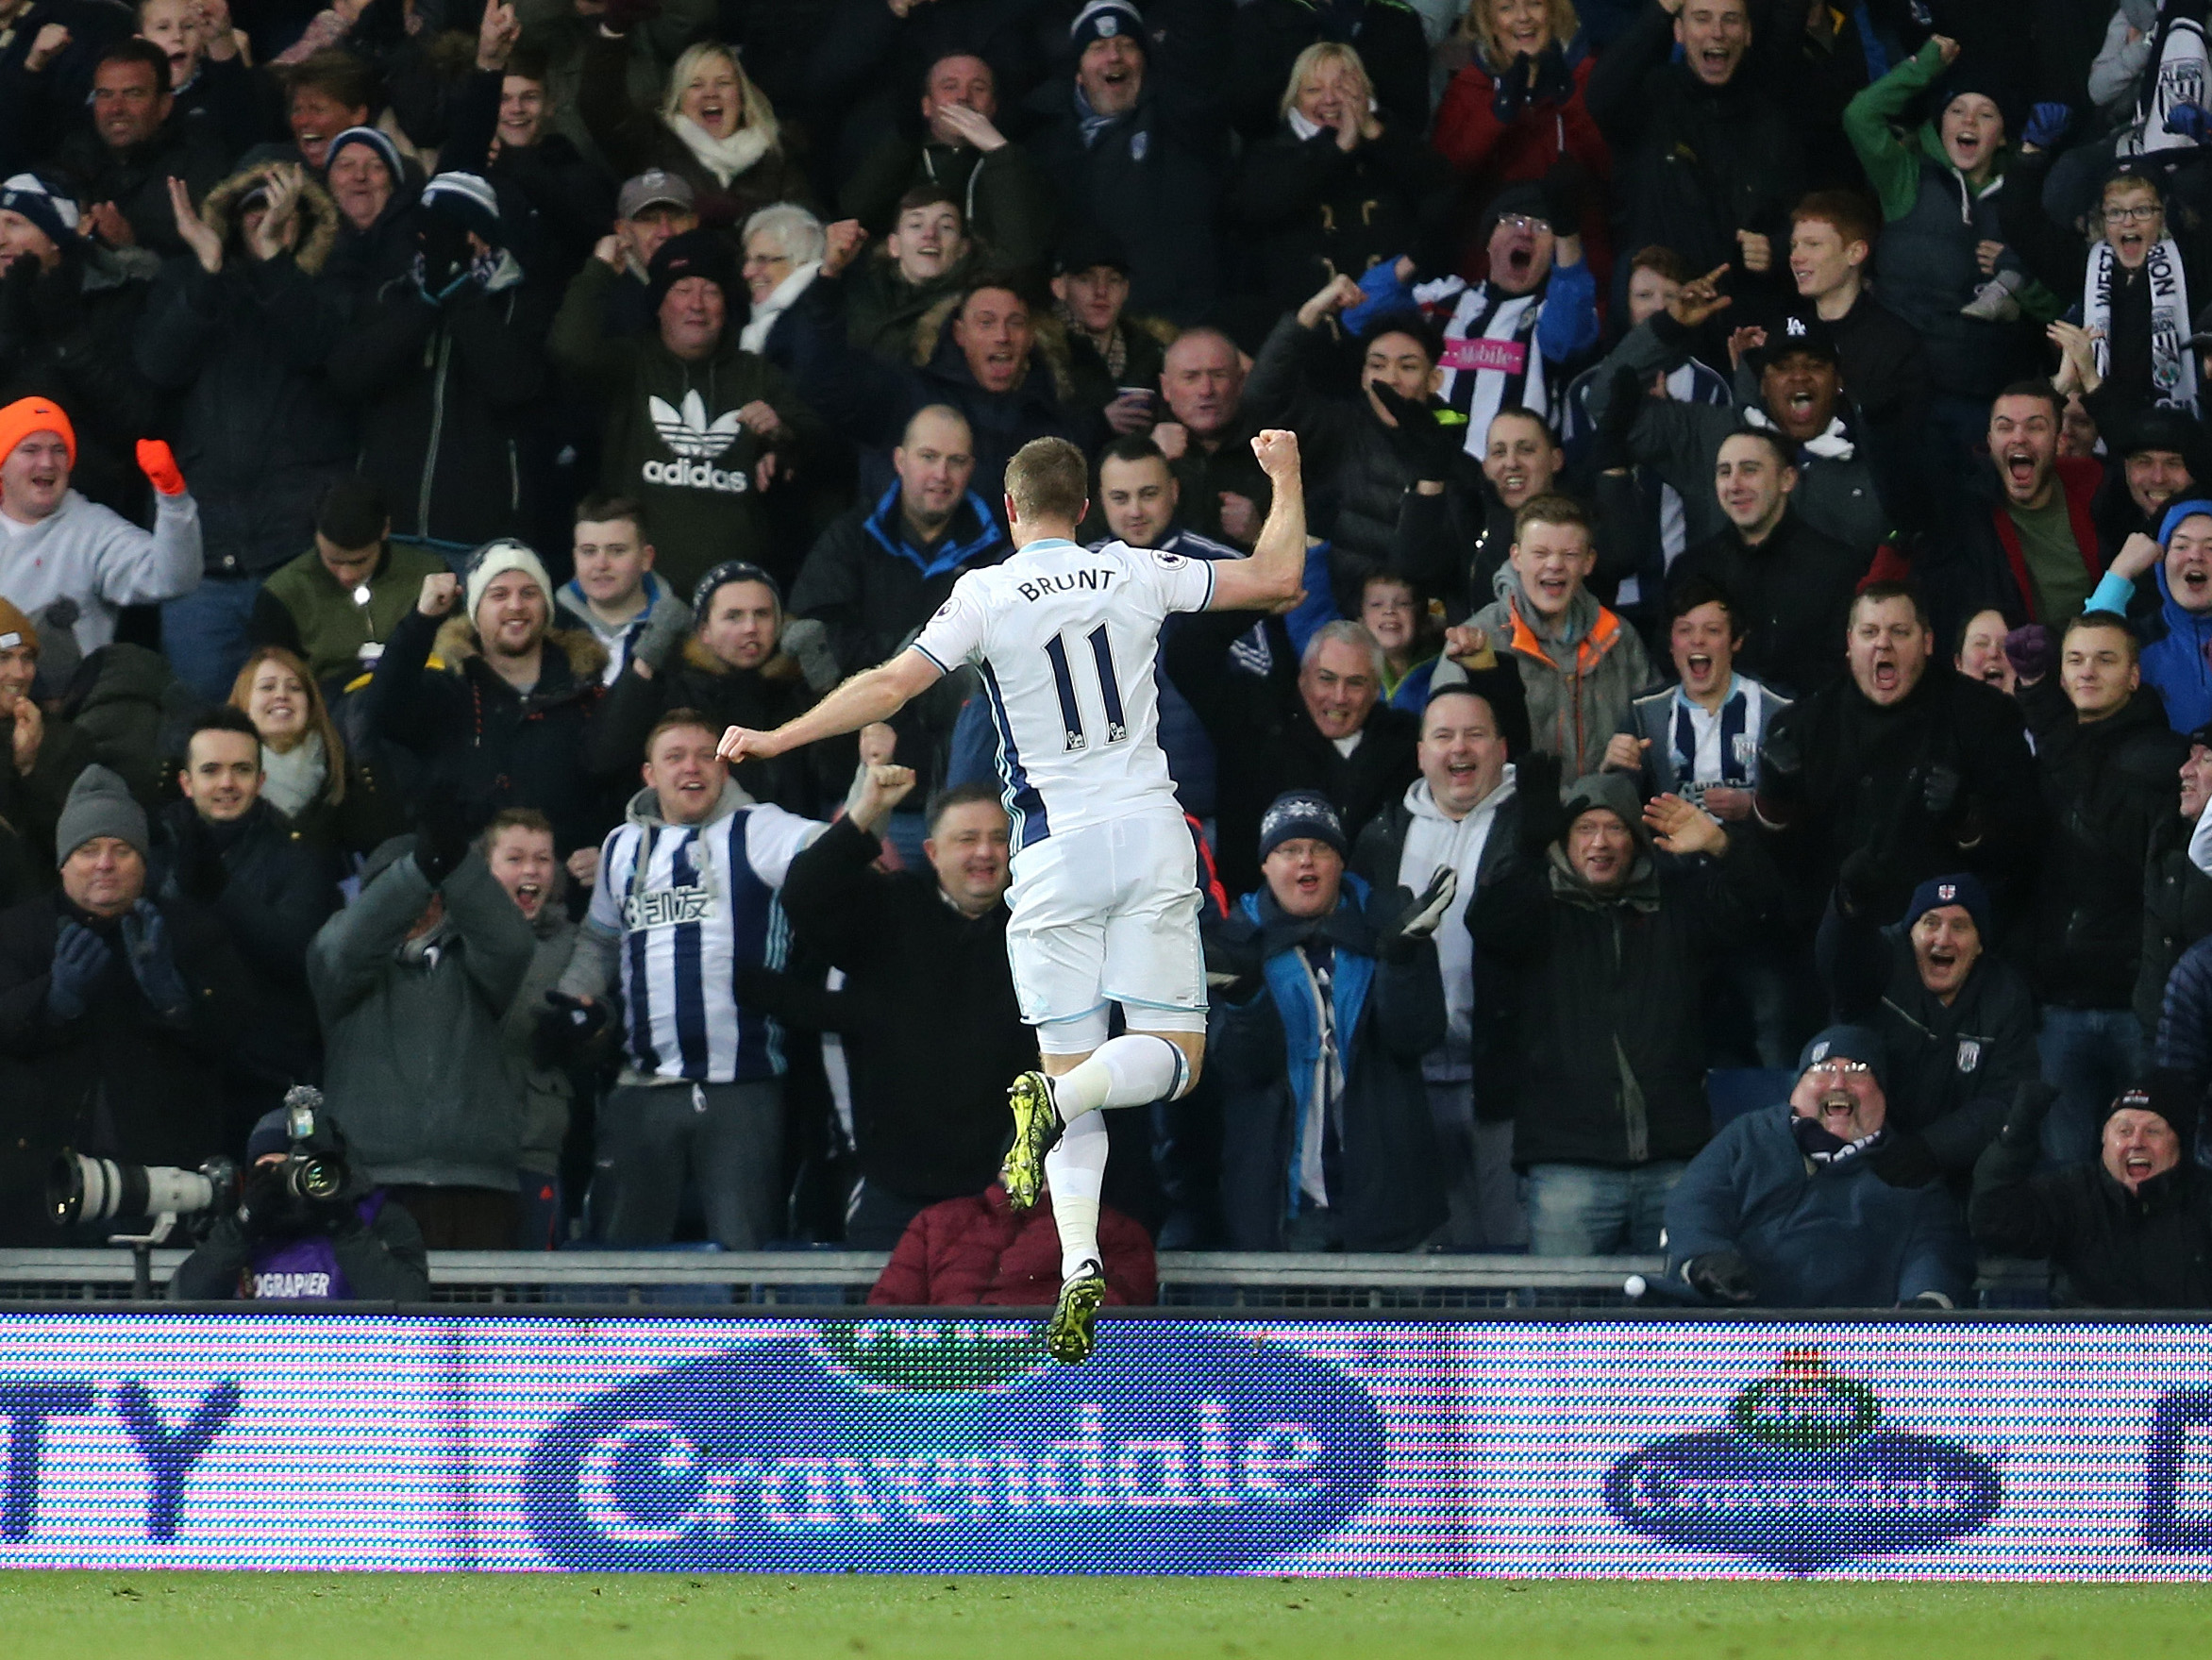 Chris Brunt celebrates scoring a goal in front of the Brummie Road End 